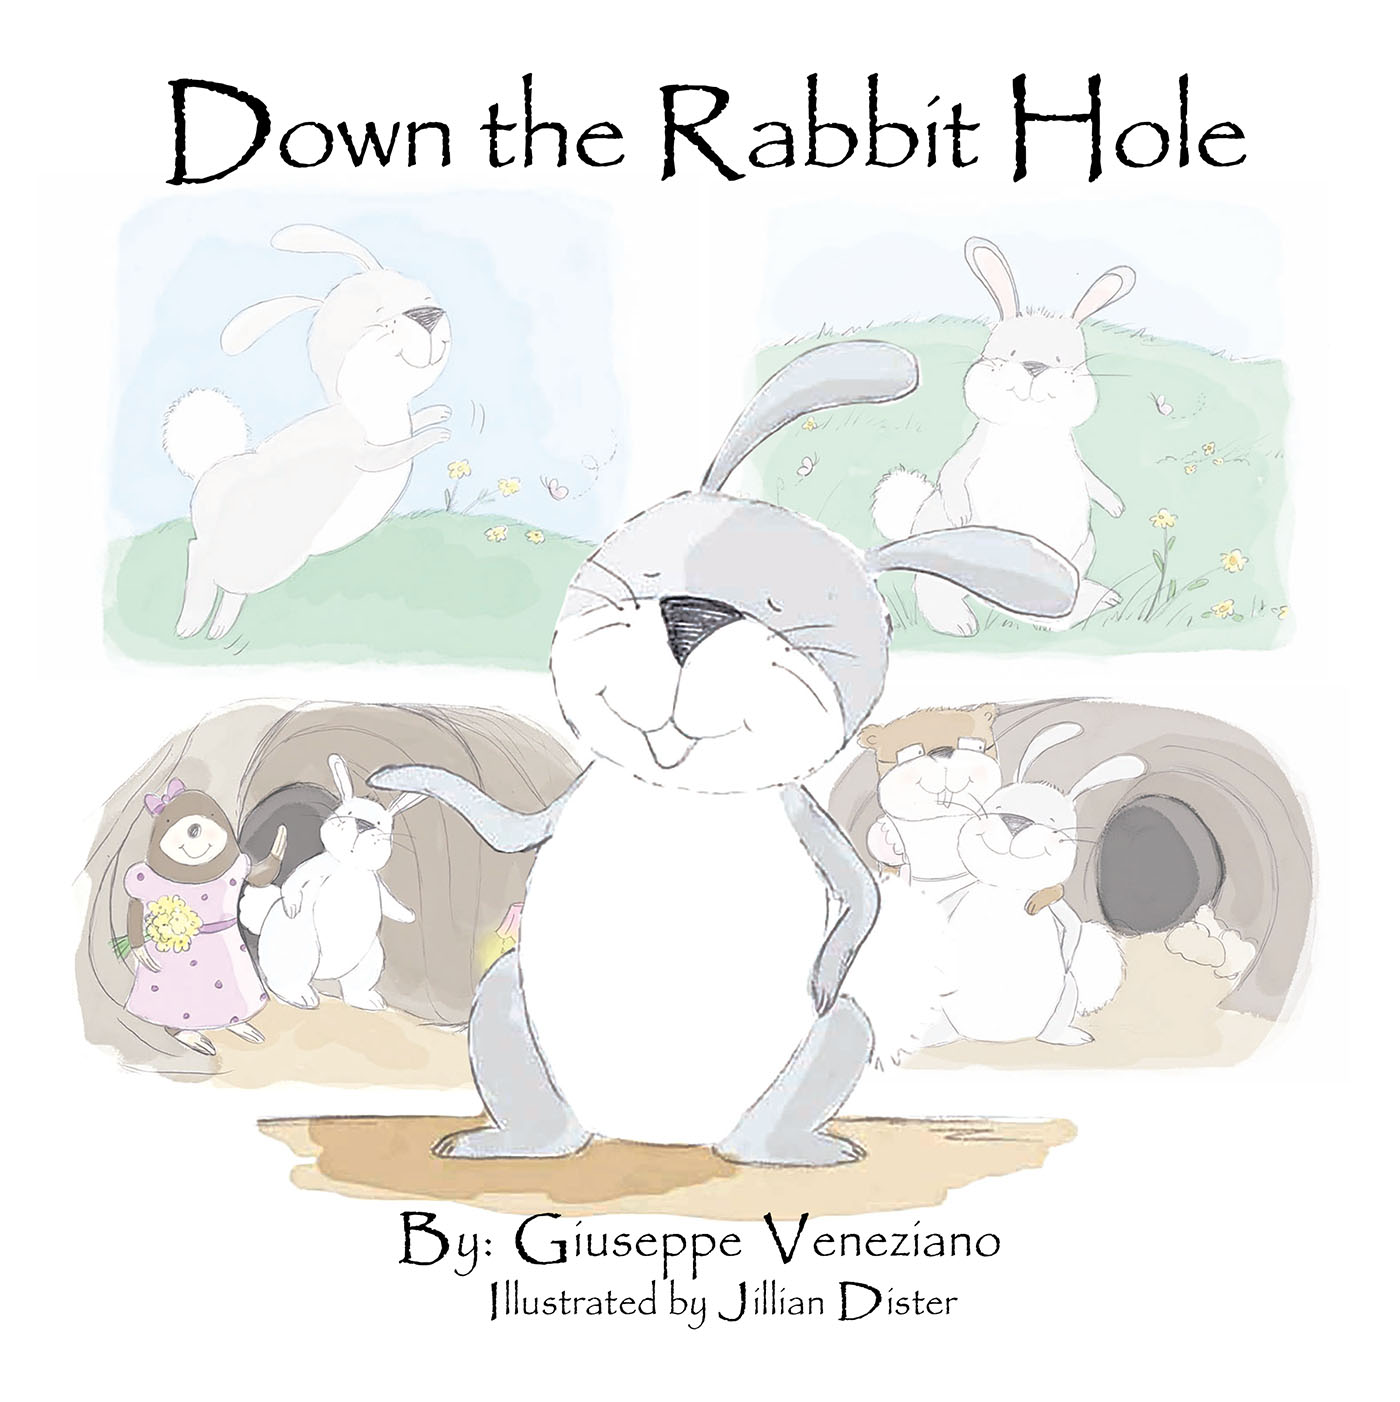 Giuseppe Veneziano’s Newly Released "Down the Rabbit Hole" is a Charming Story of Self-Discovery as a Little Rabbit Searches for Home